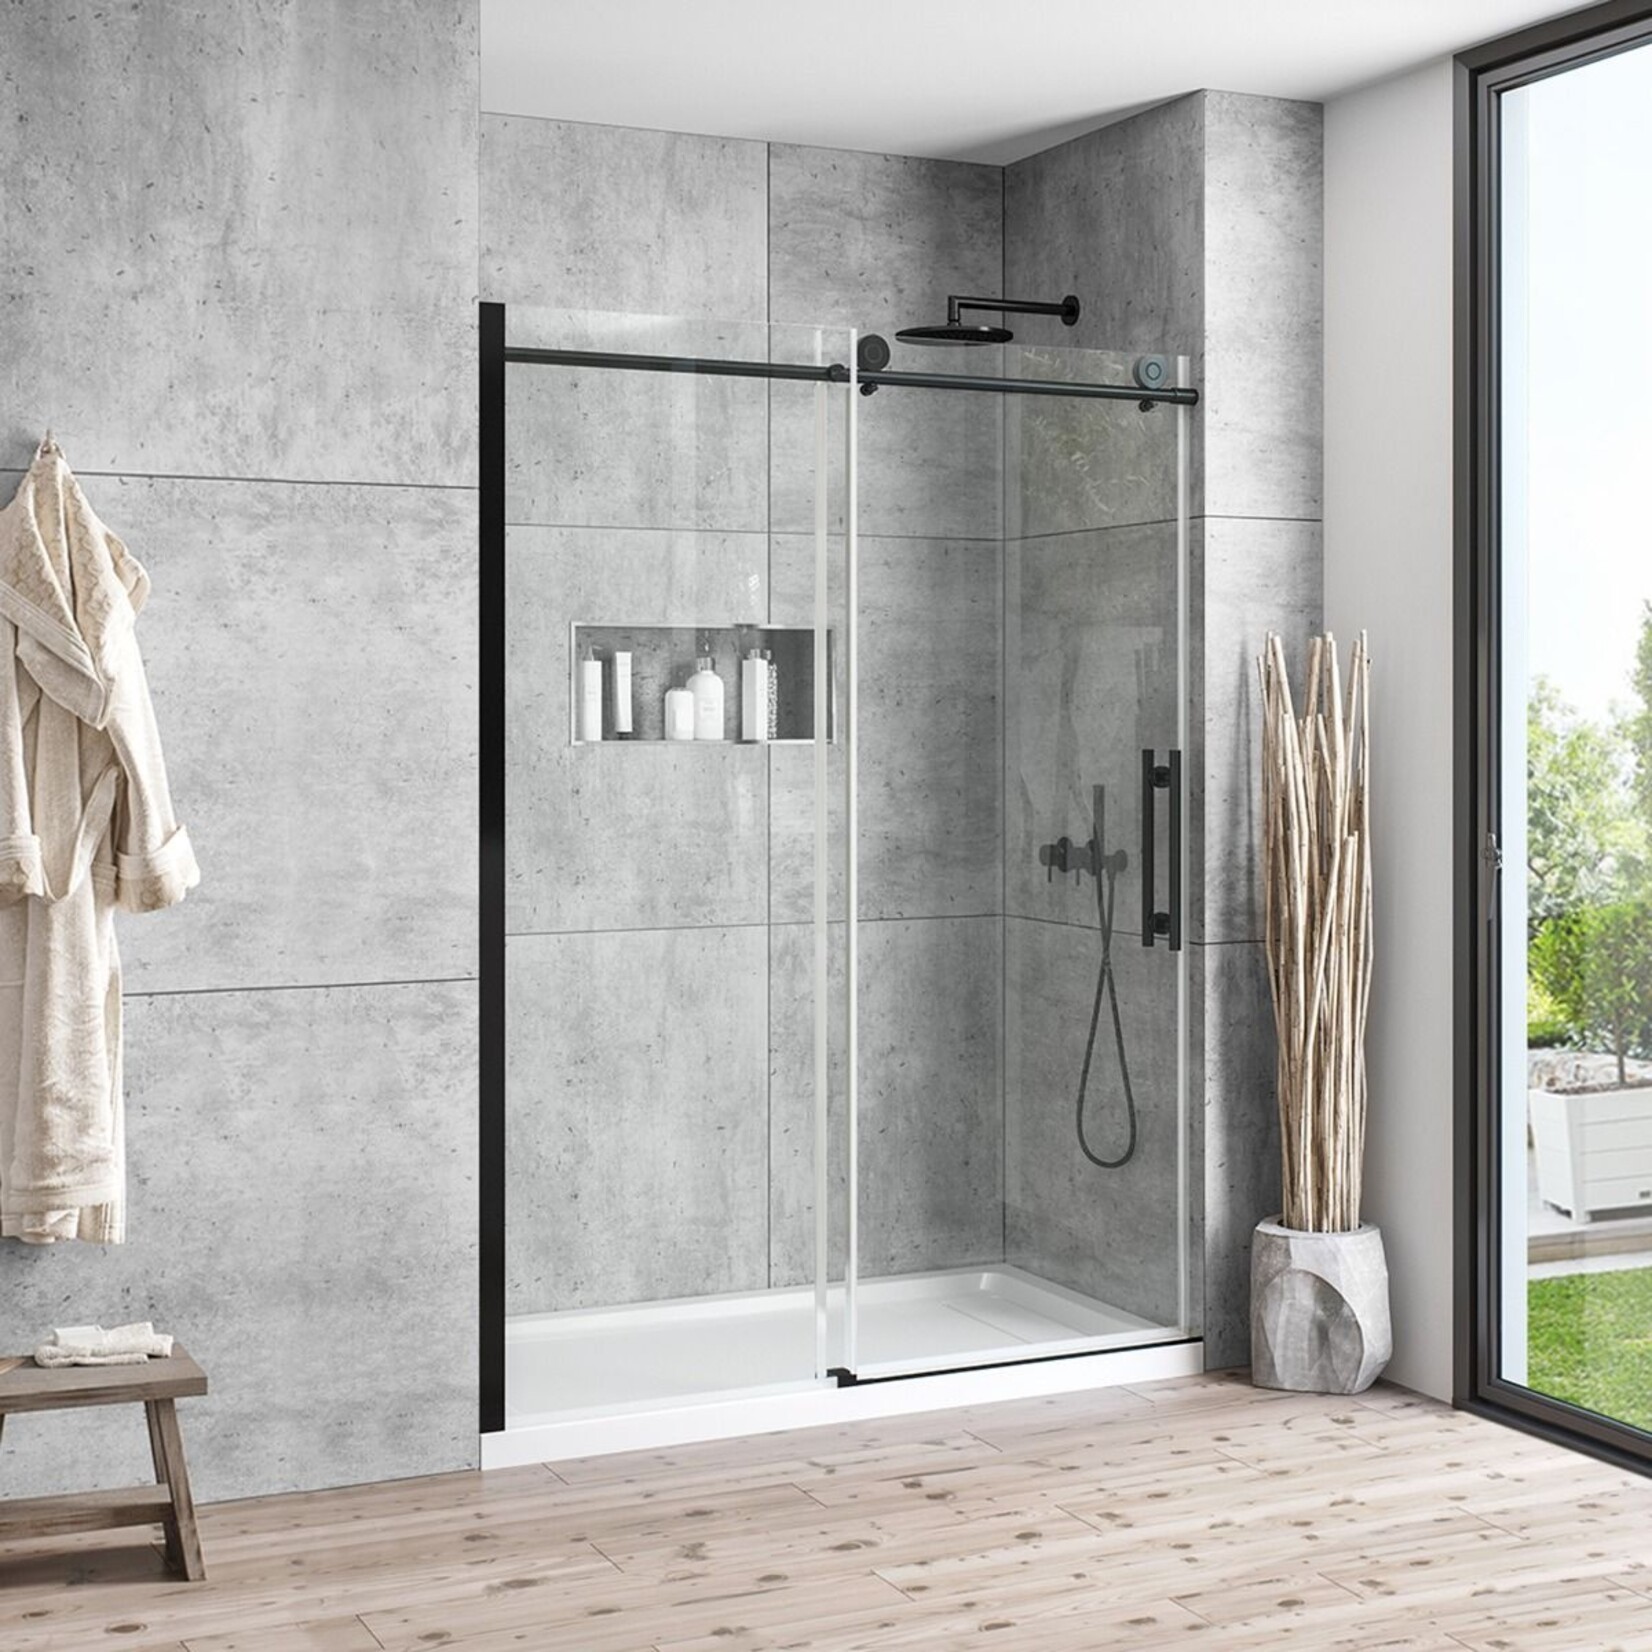 OVE Canberra 60 in. Shower Door with Base